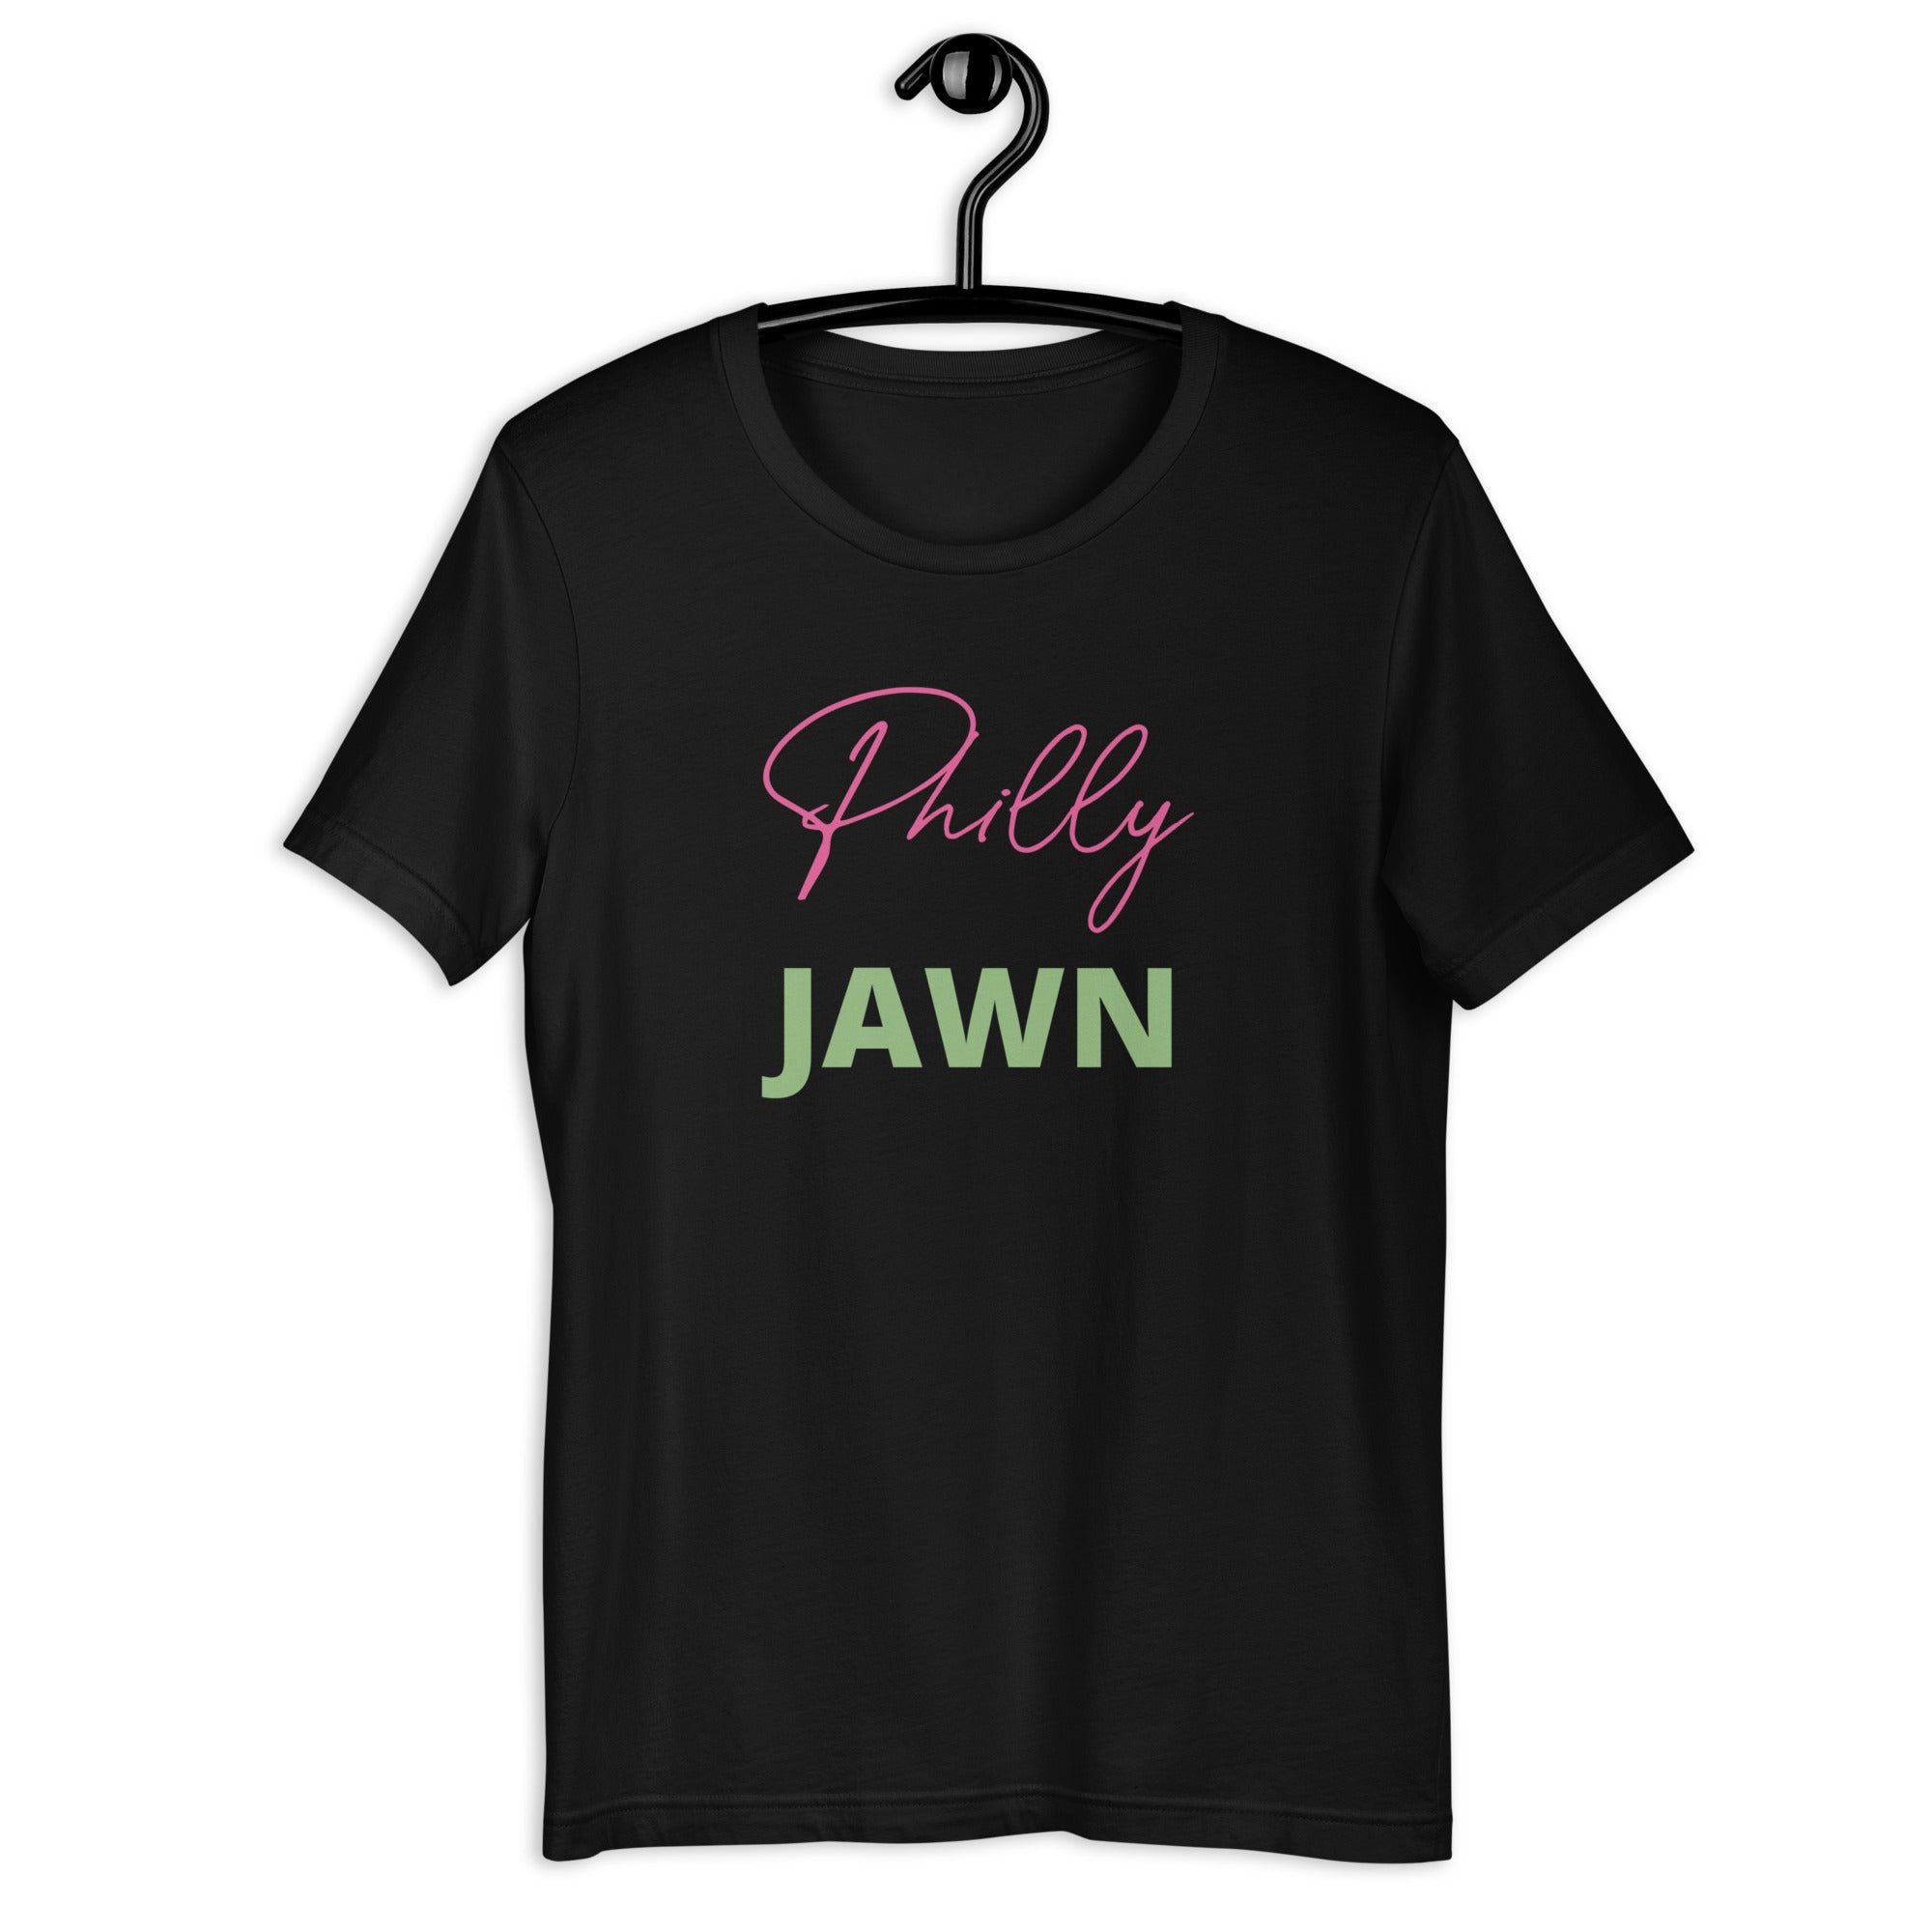 Philly Jawn 2 Unisex t-shirt